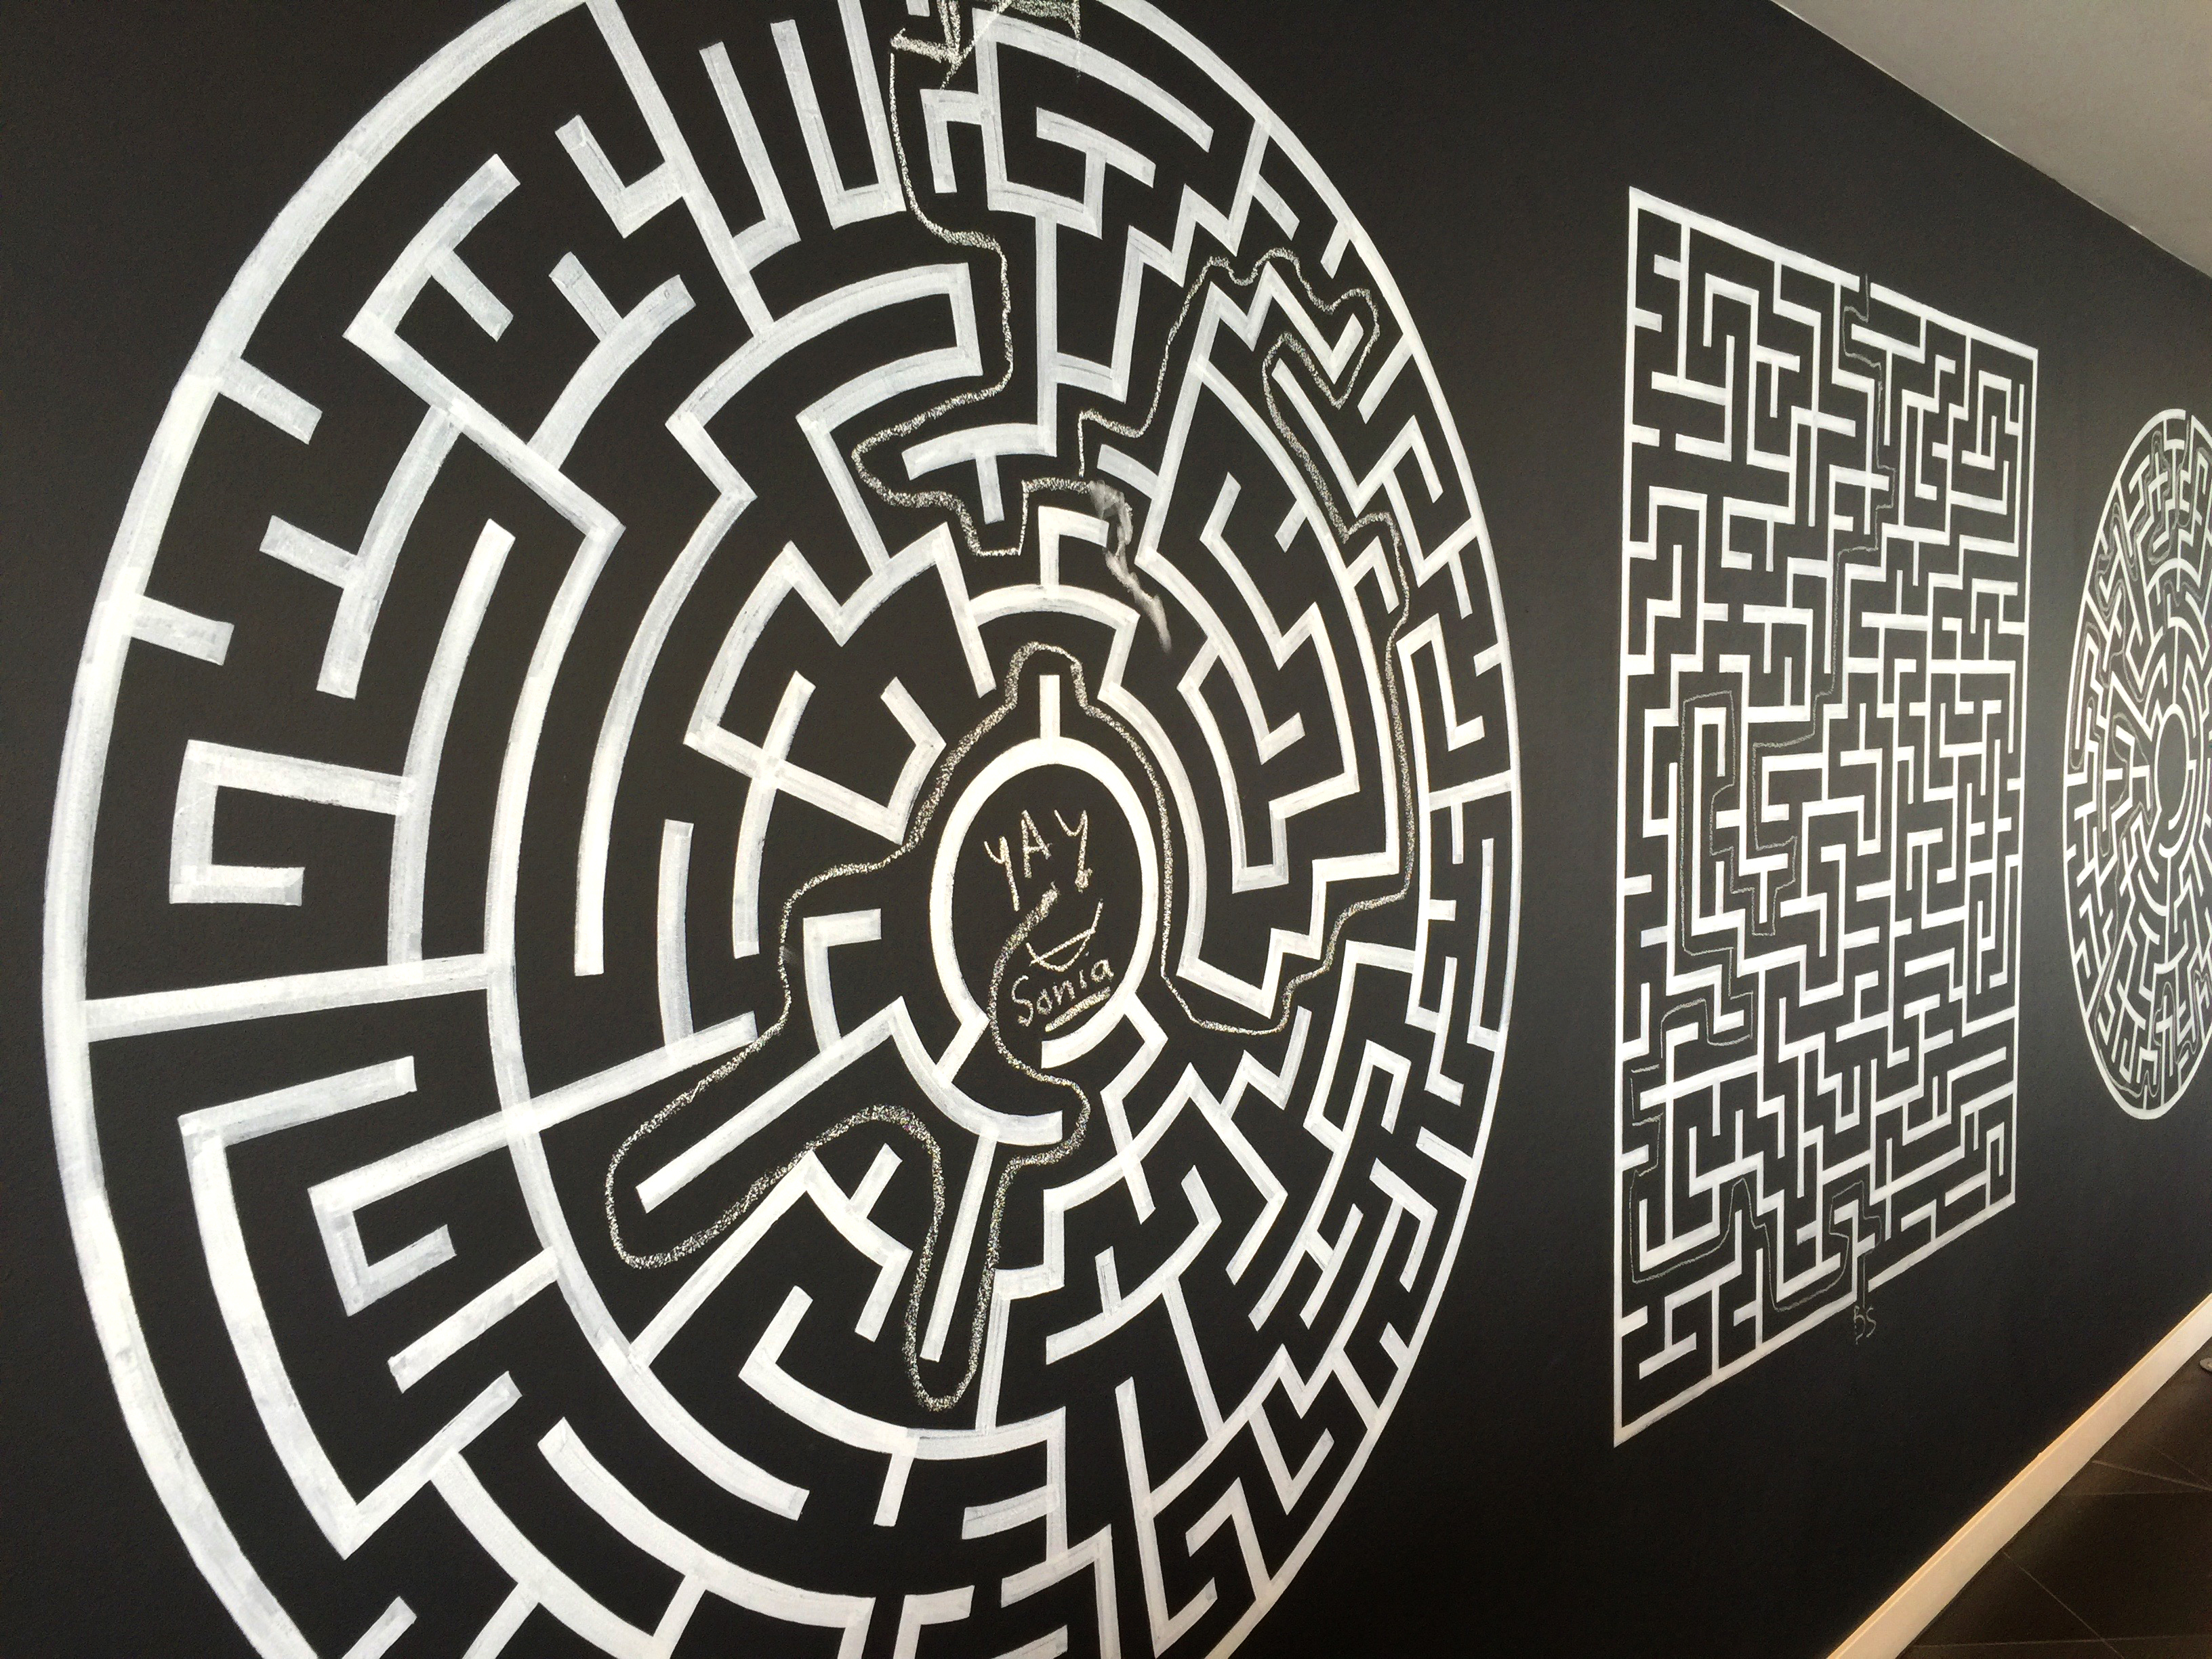 Branding by Neon - Nabarro Law Firm - Law sector branding - 125 London Wall - Amazing Maze Wall hand rendering detail 7 designed by Dana Robertson